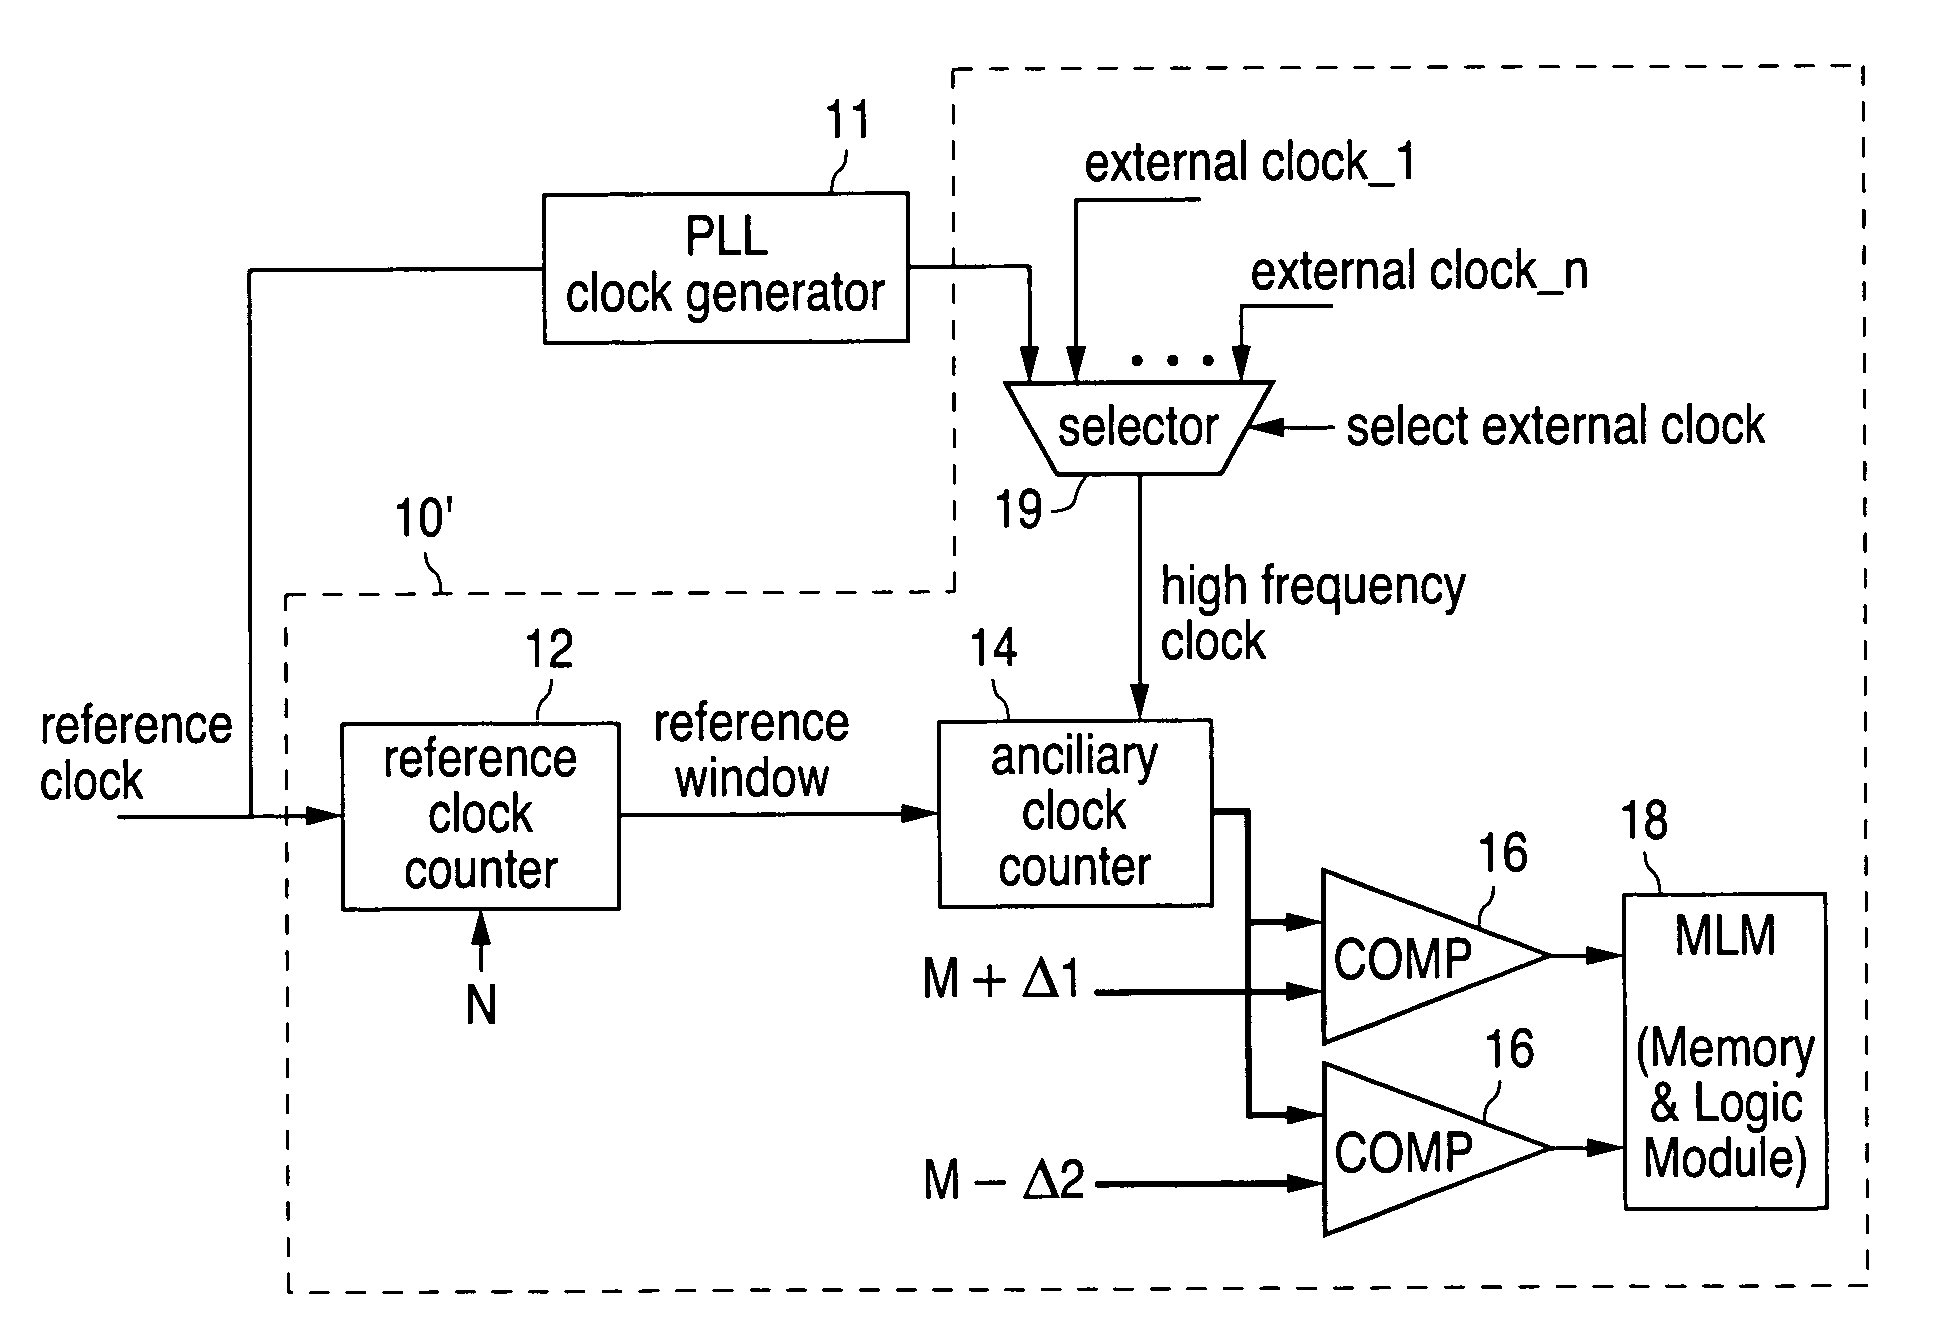 Clock frequency monitor